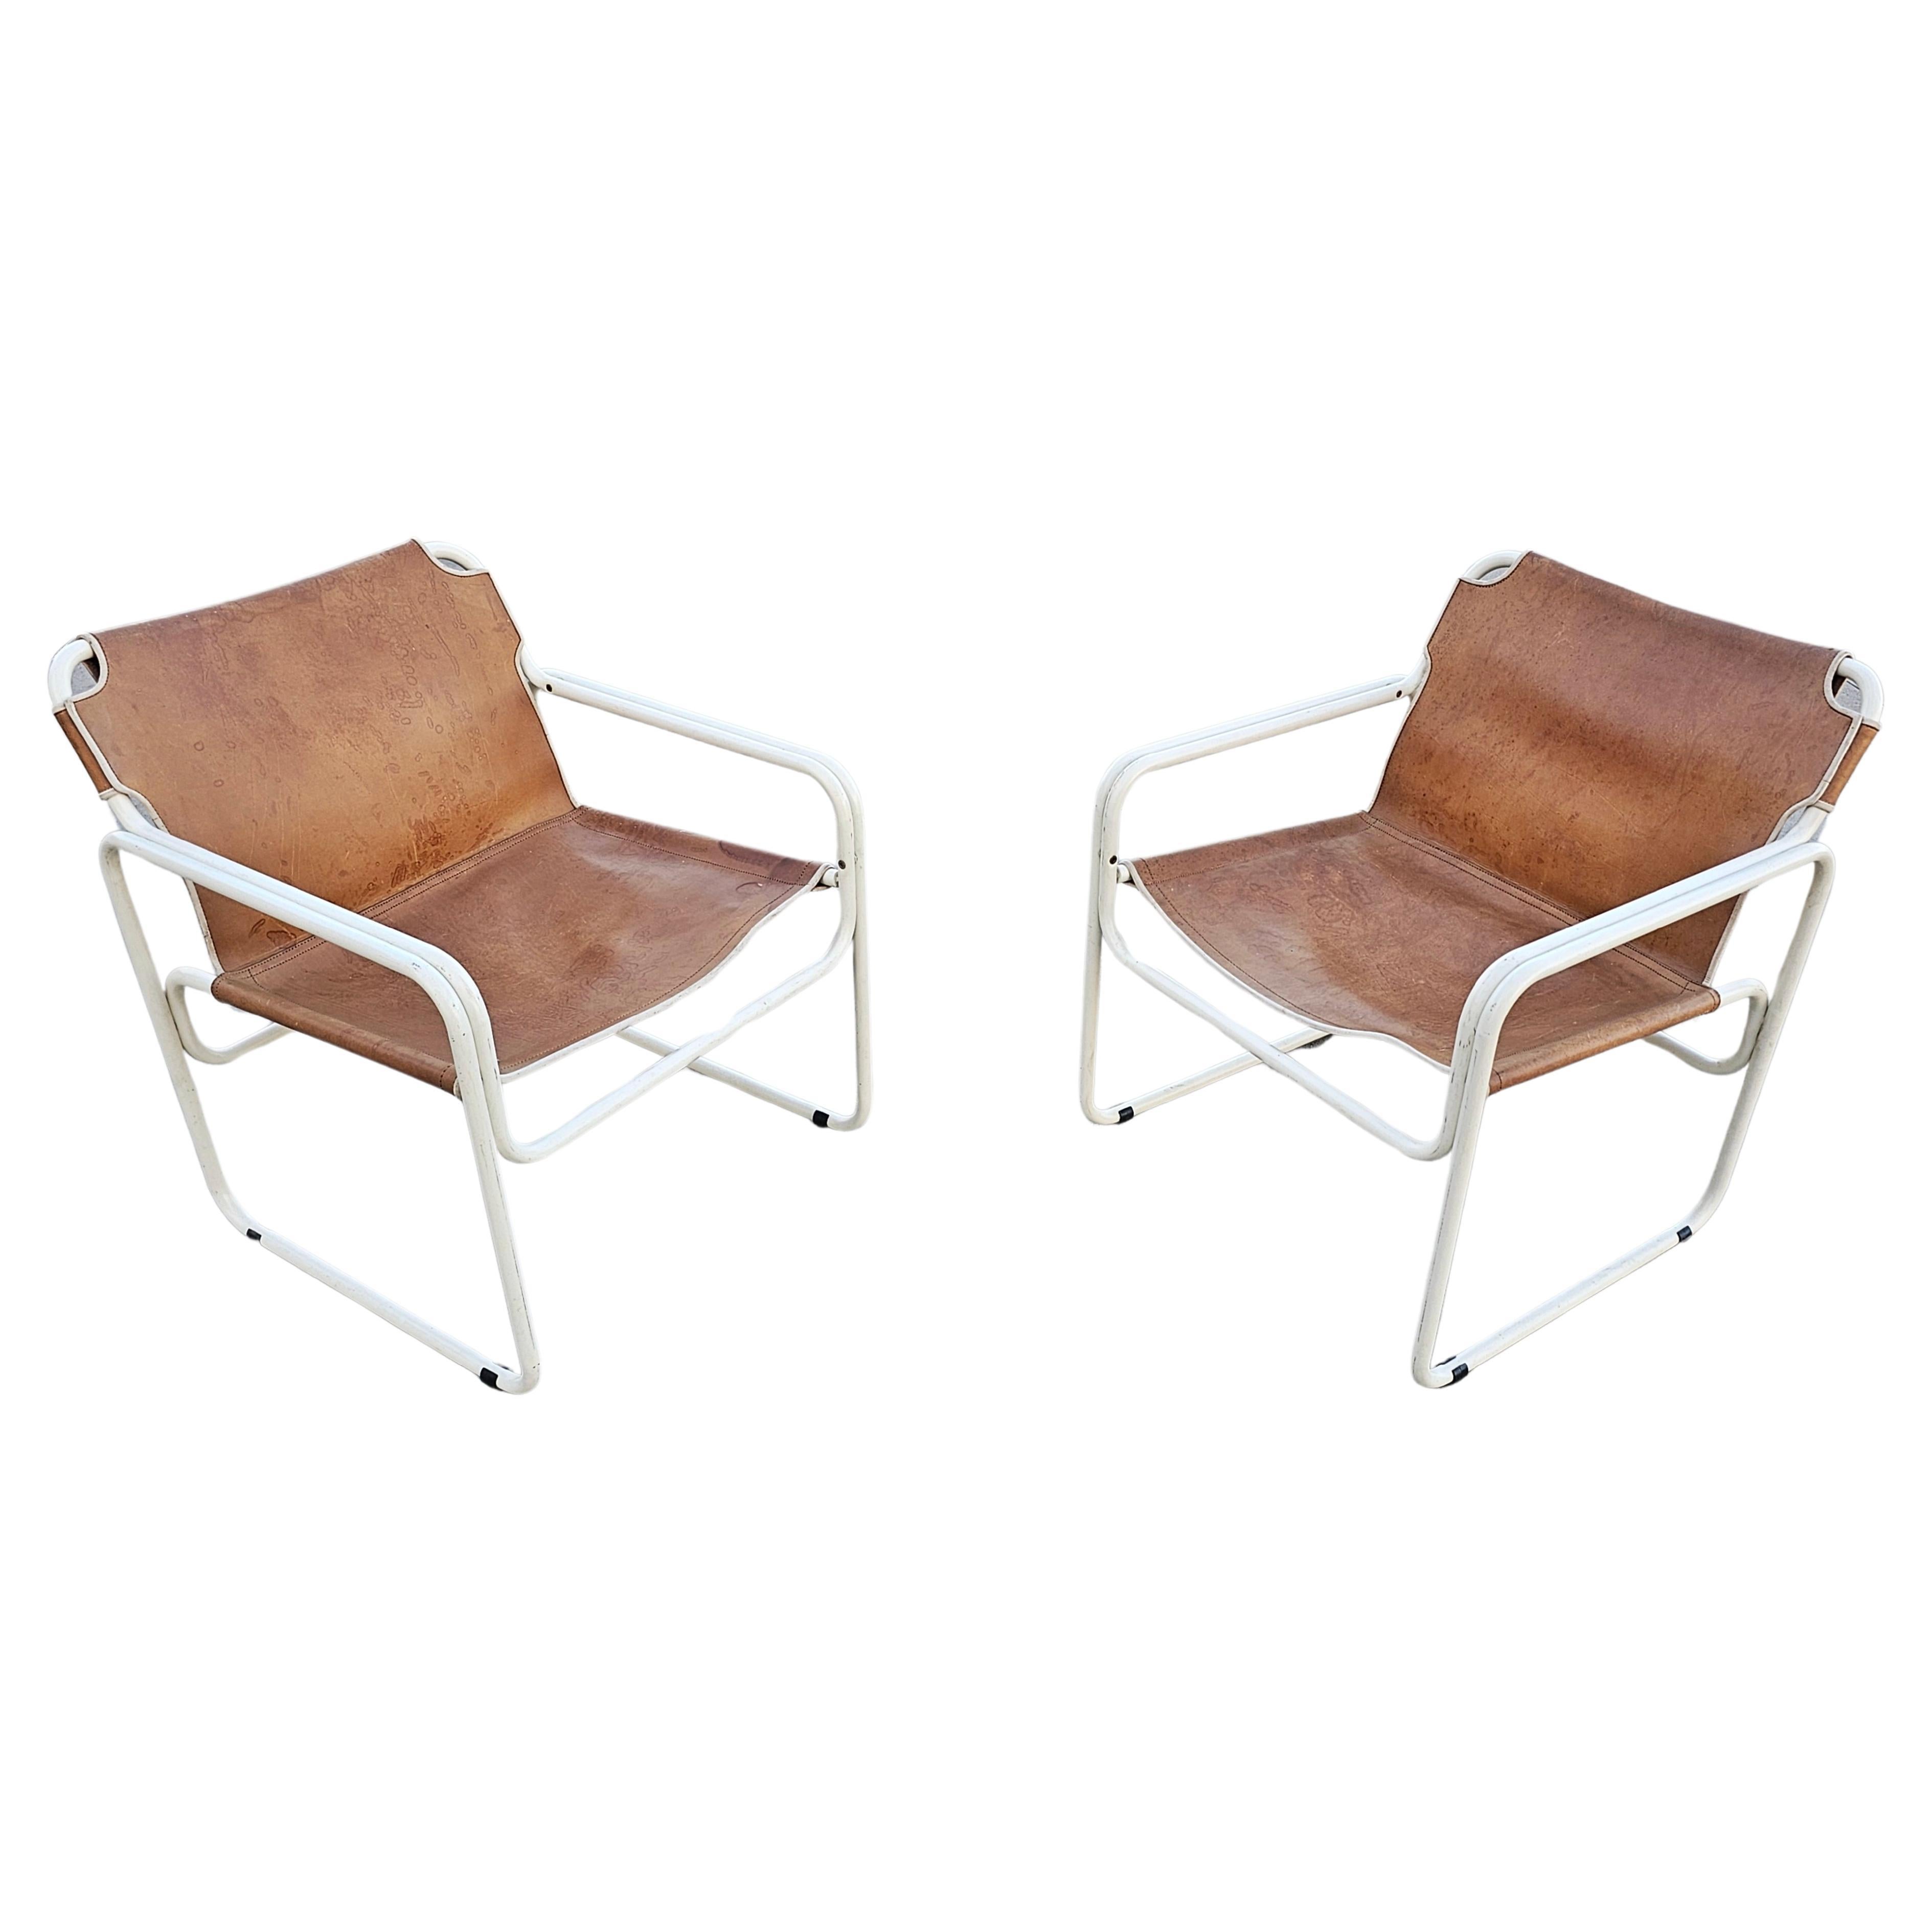 Bauhaus Style Tubular Easy Chairs in Cognac Leather by Jox Interni, 1970s For Sale